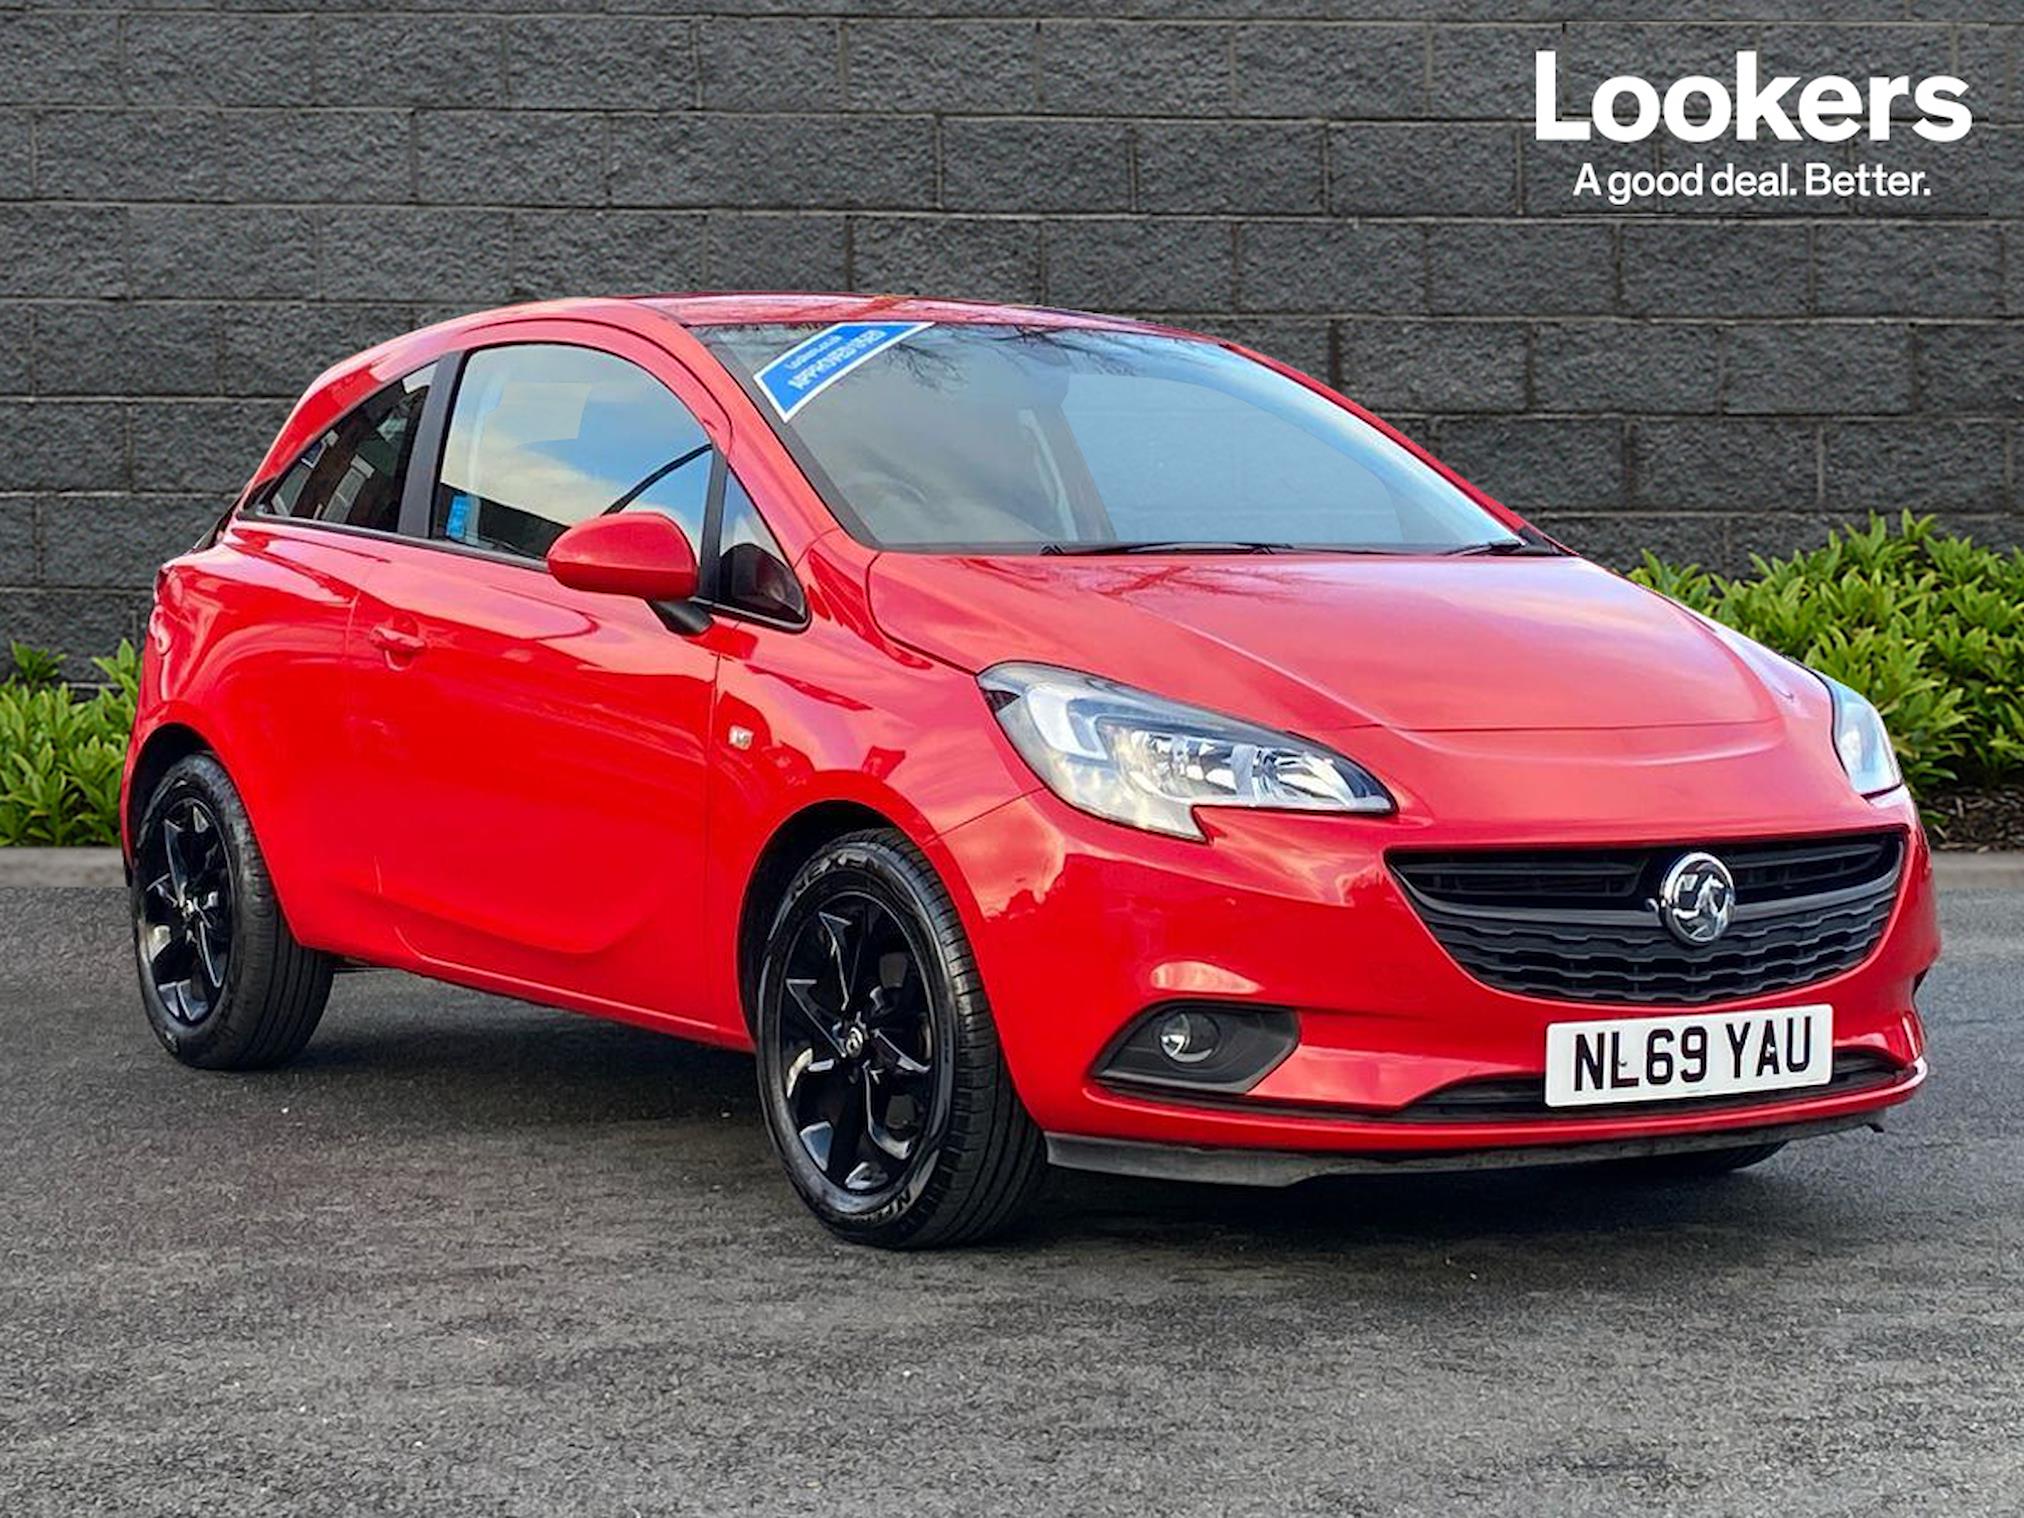 Used VAUXHALL CORSA 1.4 [75] Griffin 3Dr 2019